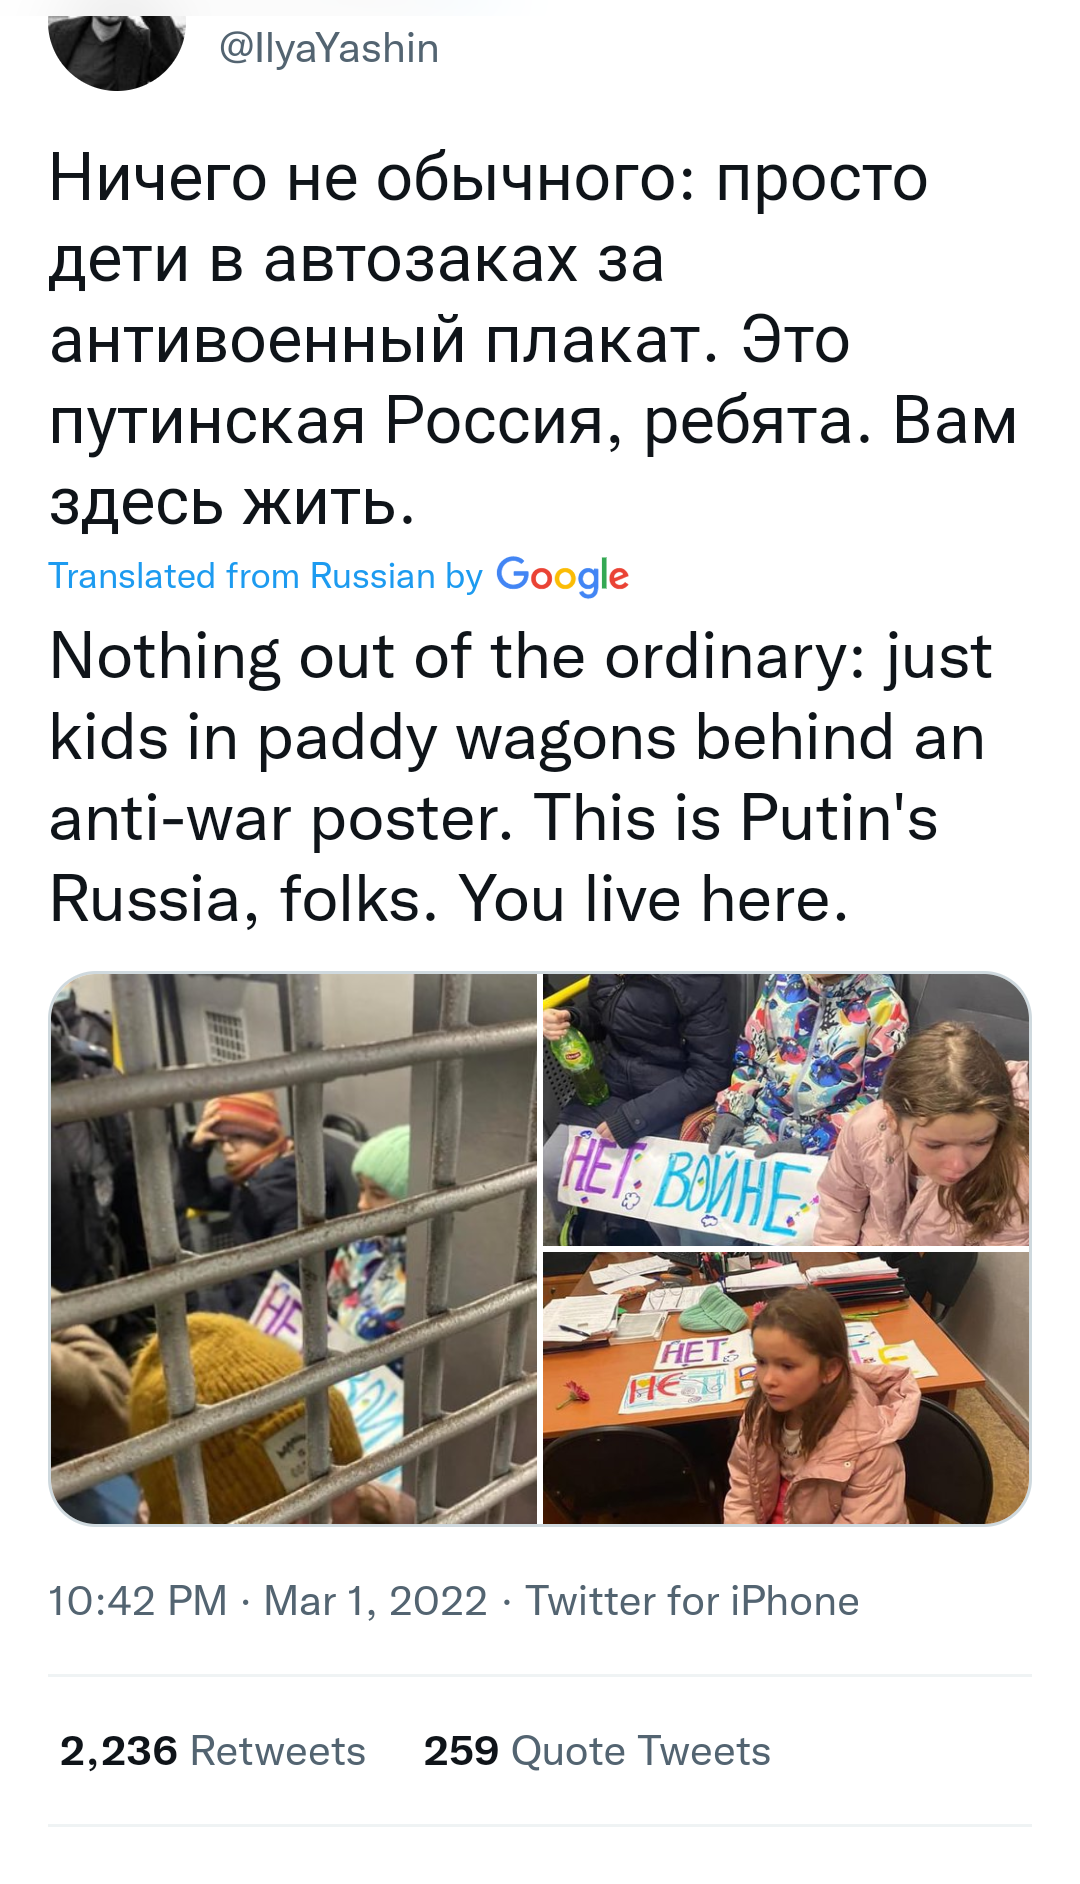 Primary school children have been arrested in Russia for waving signs of "No more war", Primary school children  have been arrested in Russia for waving signs of &#8220;No more war&#8221;, INFINITY LOADED